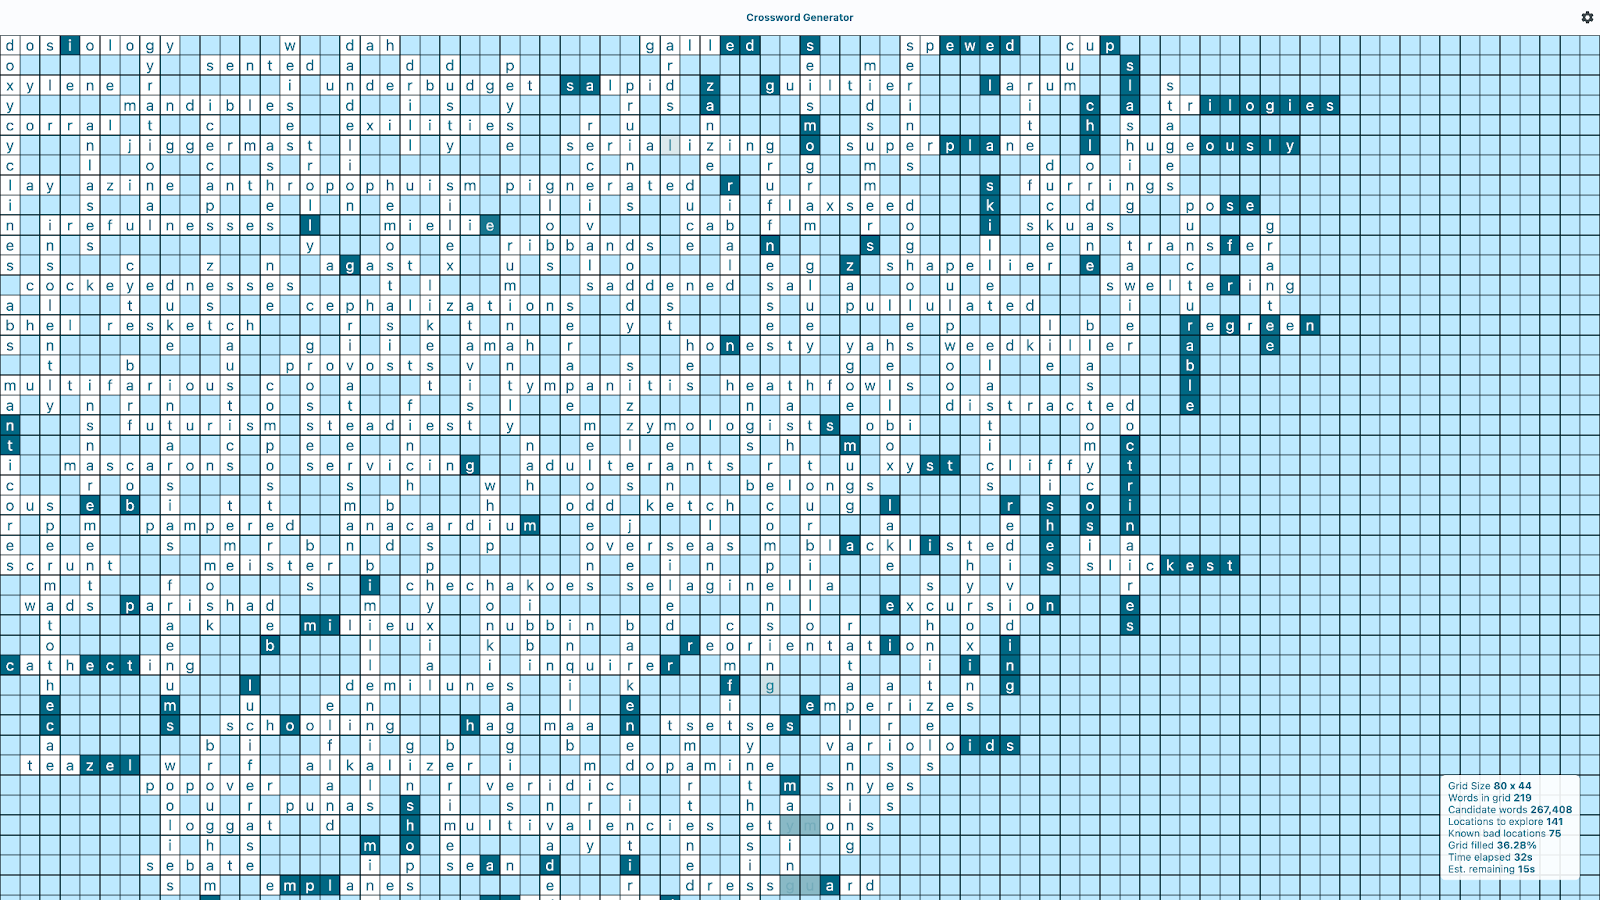 Crossword Generator showing the generation part way through. Some letters have white text on dark blue background, while others are blue text on white background.